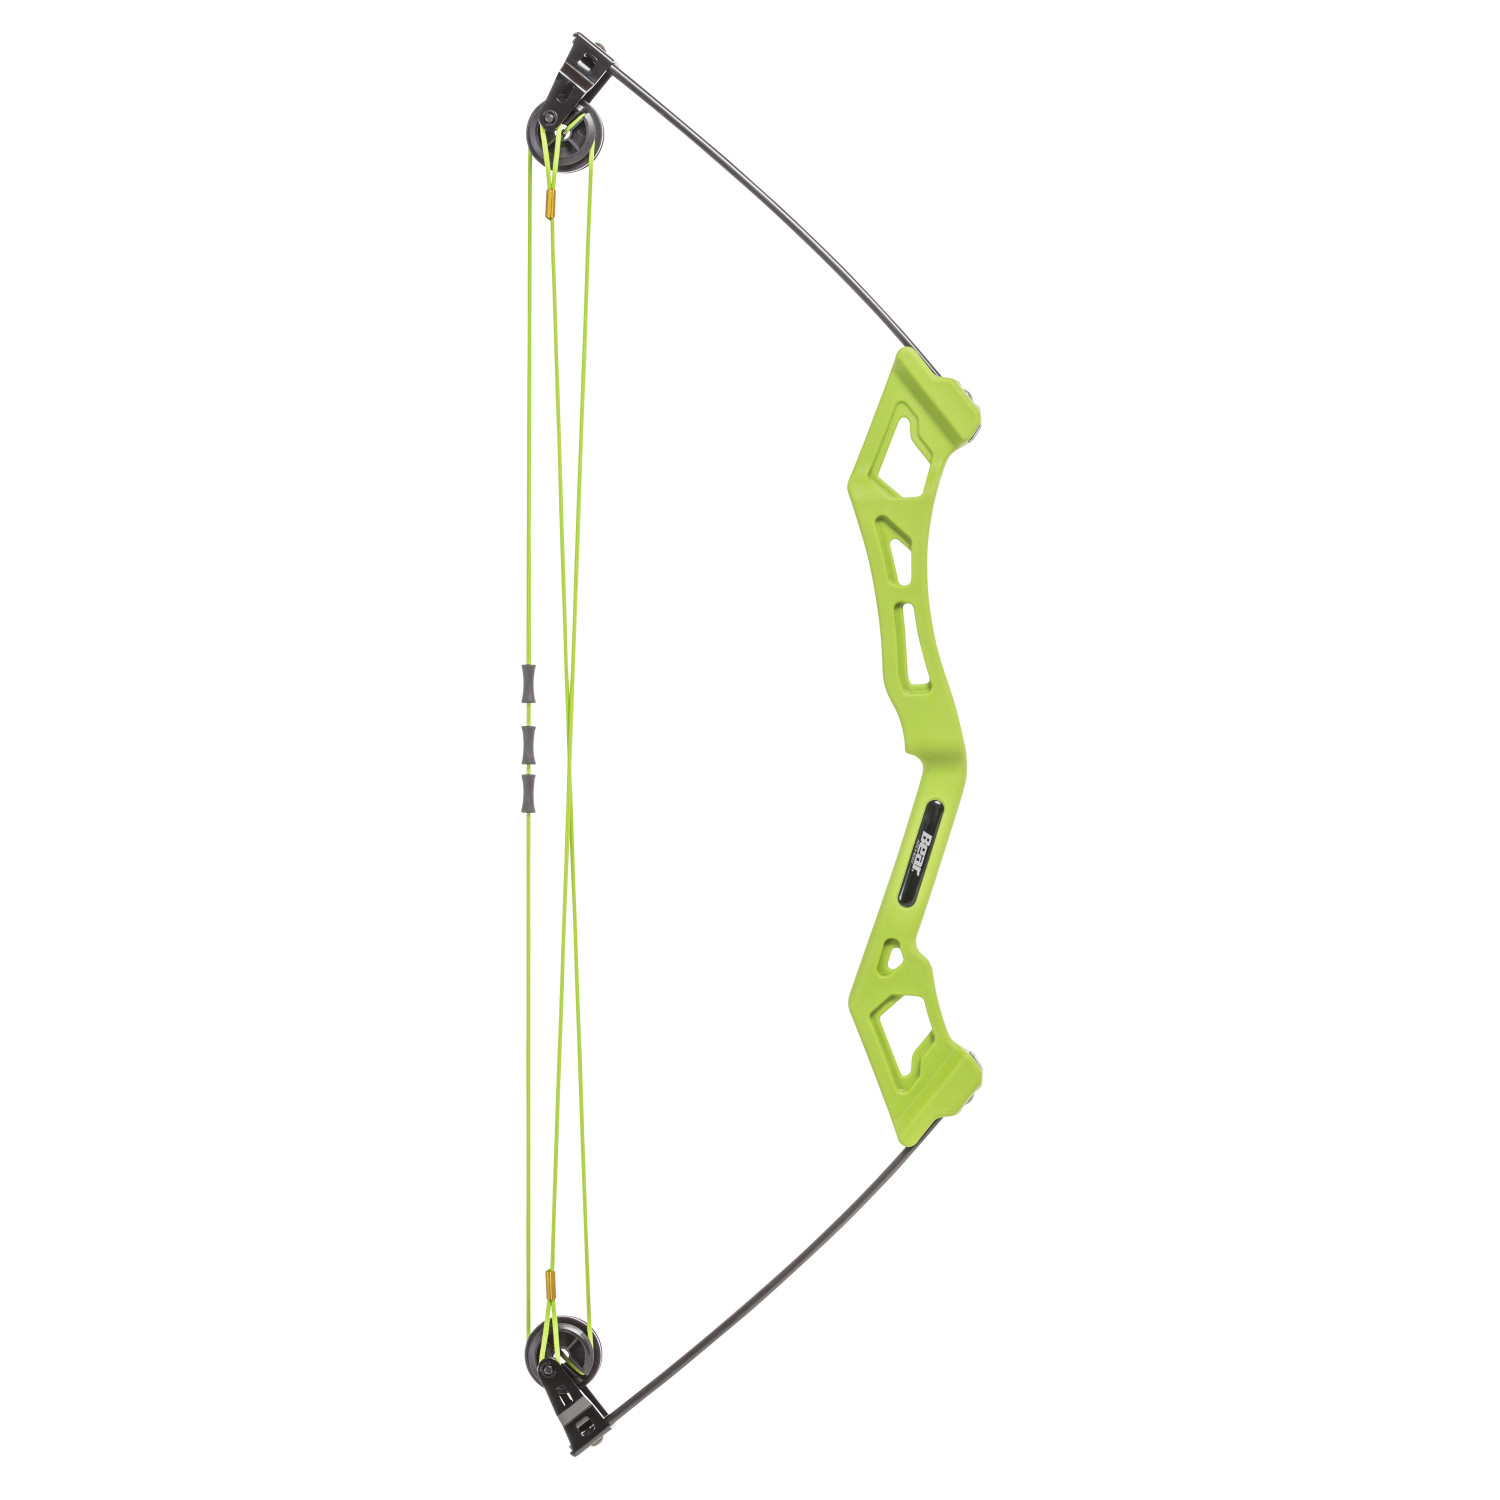 Bear Archery Apprentice Youth Bow Set Featuring 6-13.5 lb. Draw Weight and 13- to 24-inch Draw Length Range and 27” Axle-to-Axle Right-Handed Bow with Composite Limbs - image 3 of 10